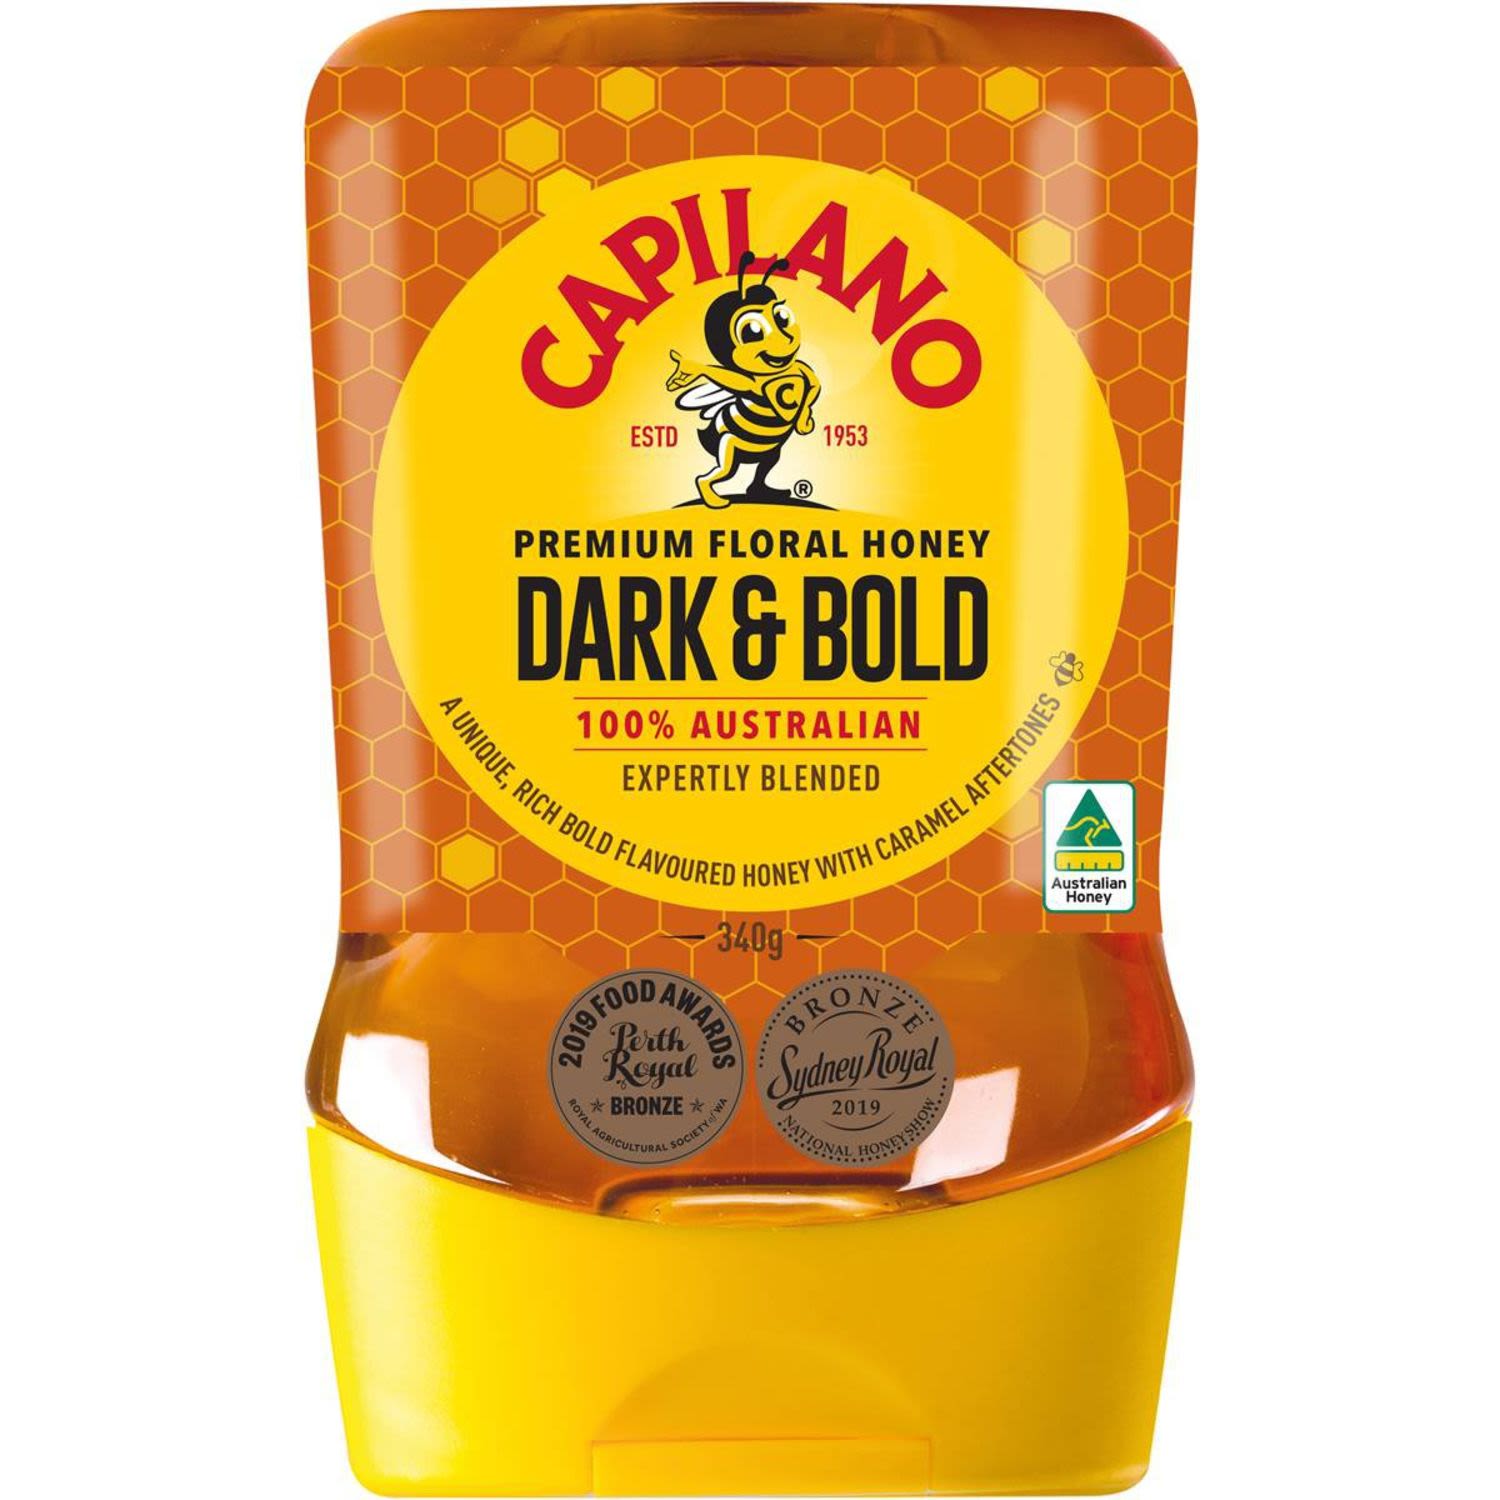  Enjoy the bold flavour of Capilano pure Australian Dark & Bold honey and it's caramel afternotes in stir fries, marinades, roasted veggies or your coffee as a natural substitute for sugar.<br /> <br />